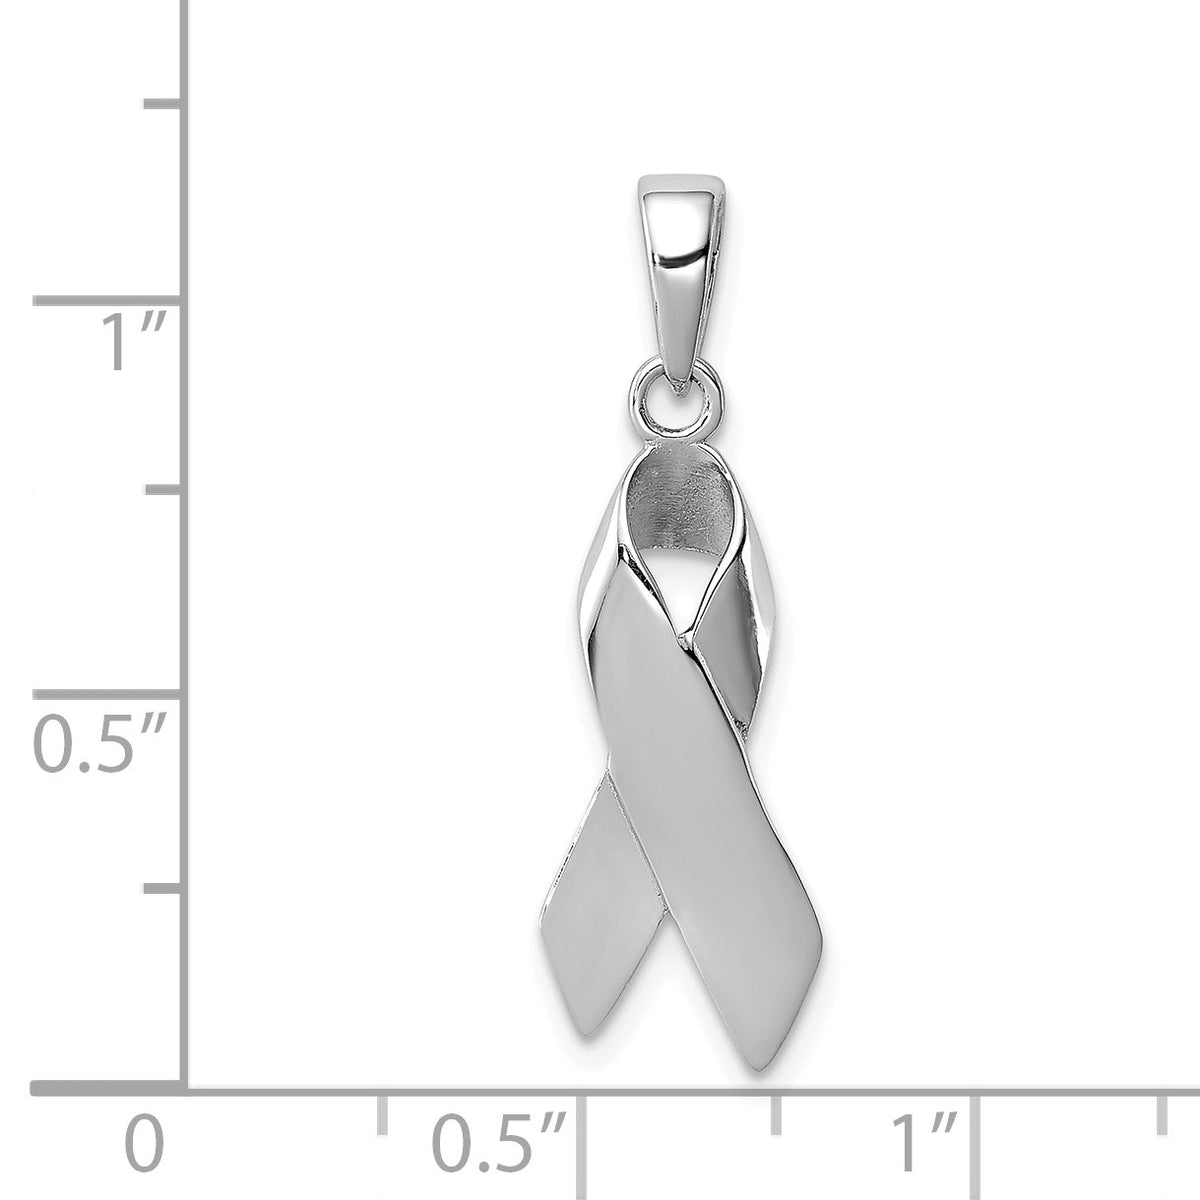 Alternate view of the Sterling Silver Polished Cancer Awareness Ribbon Pendant by The Black Bow Jewelry Co.